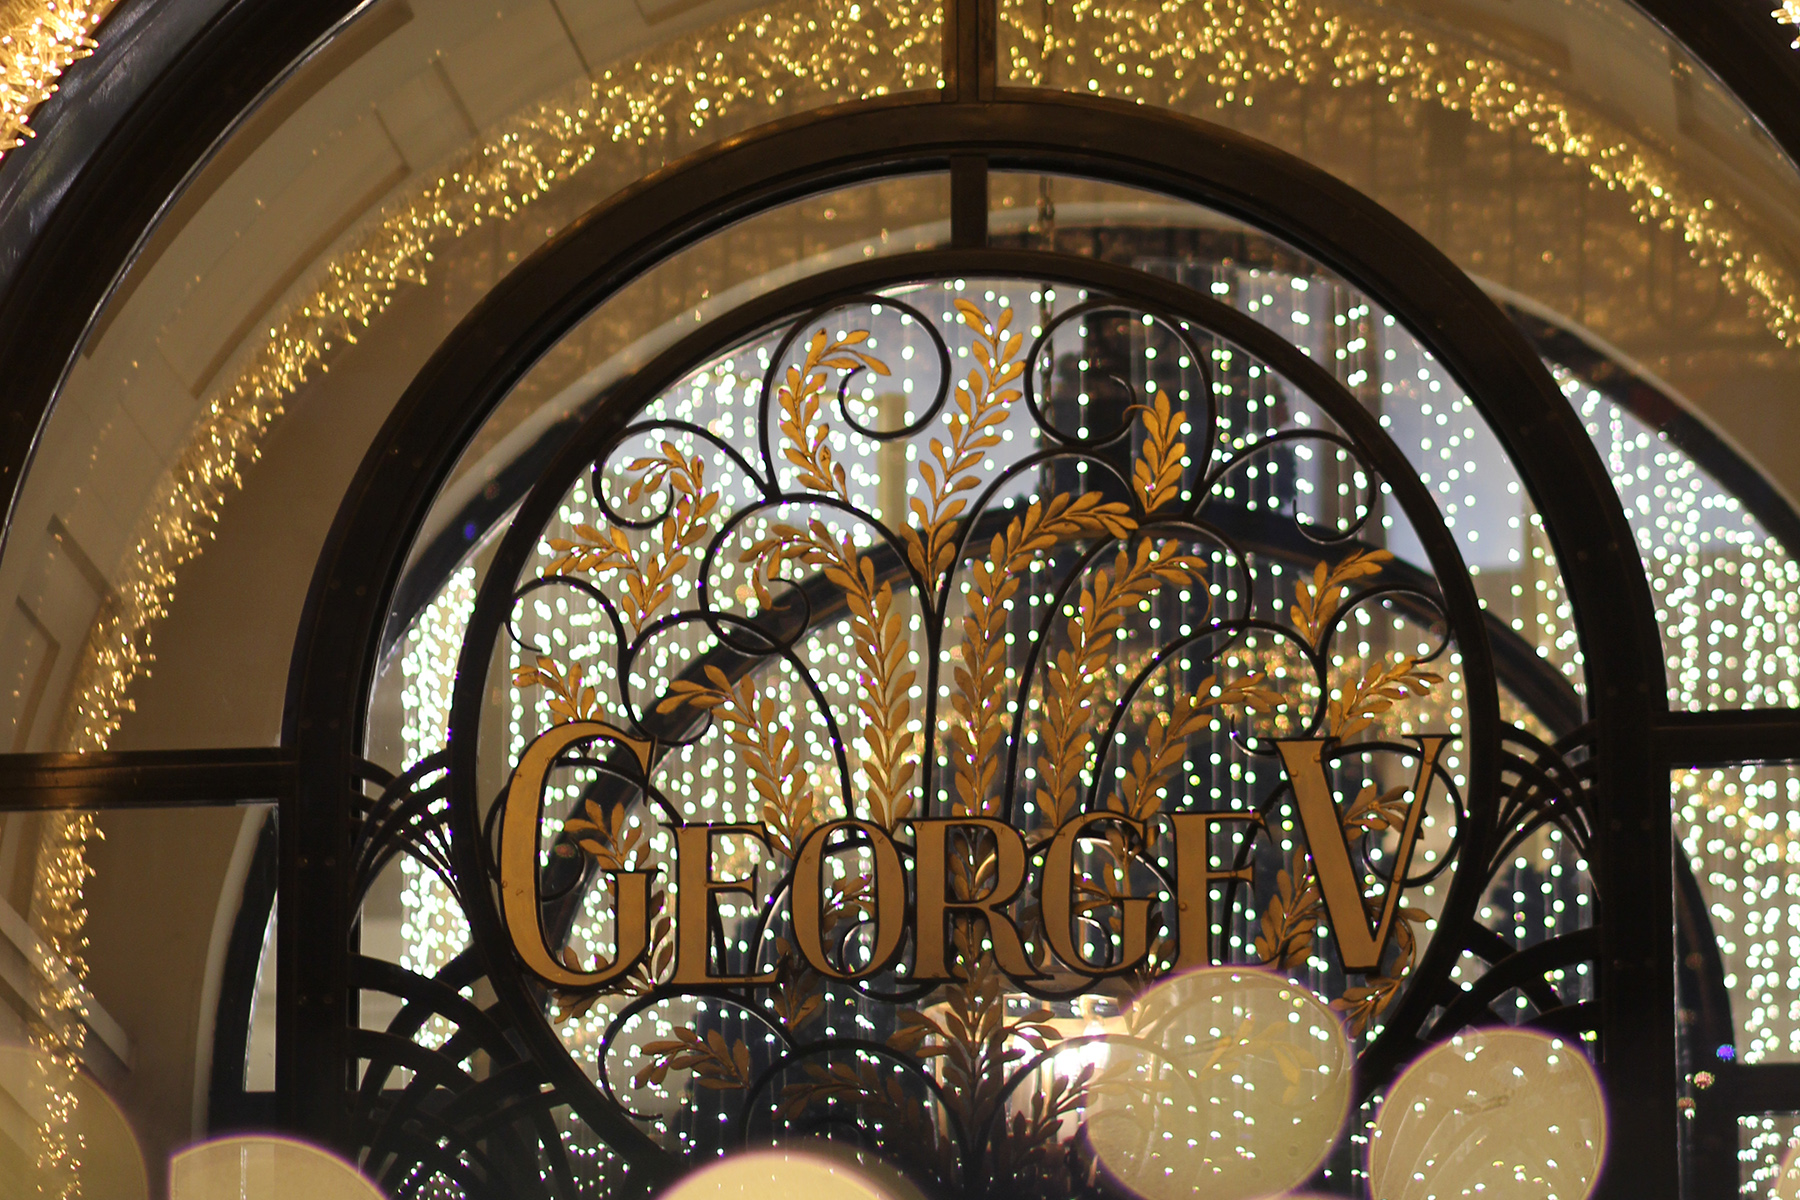 Facade of the hotel decorated for the festive season